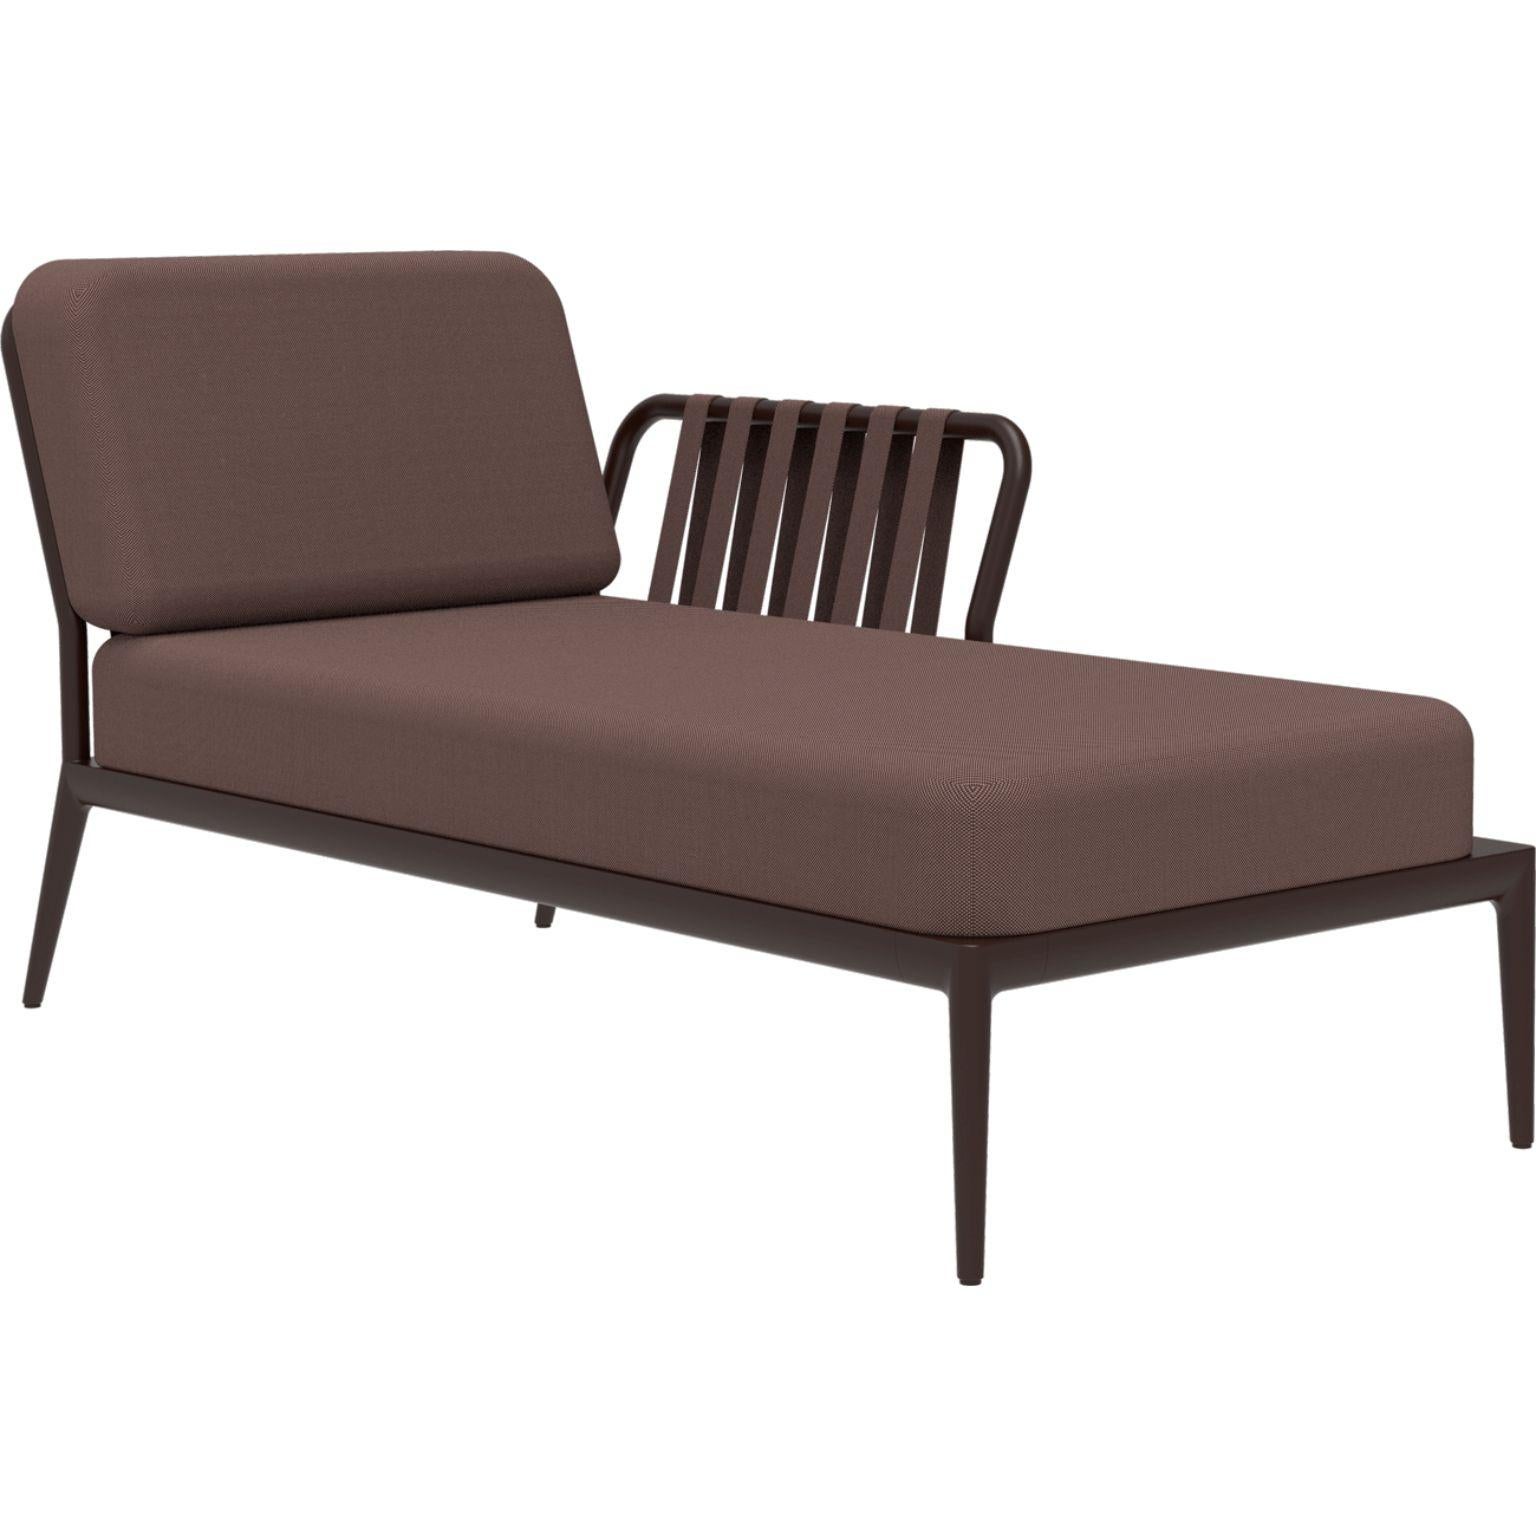 Ribbons chocolate left chaise longue by MOWEE
Dimensions: D80 x W155 x H81 cm
Material: aluminum, upholstery
Weight: 28 kg
Also available in different colours and finishes.

An unmistakable collection for its beauty and robustness. A tribute